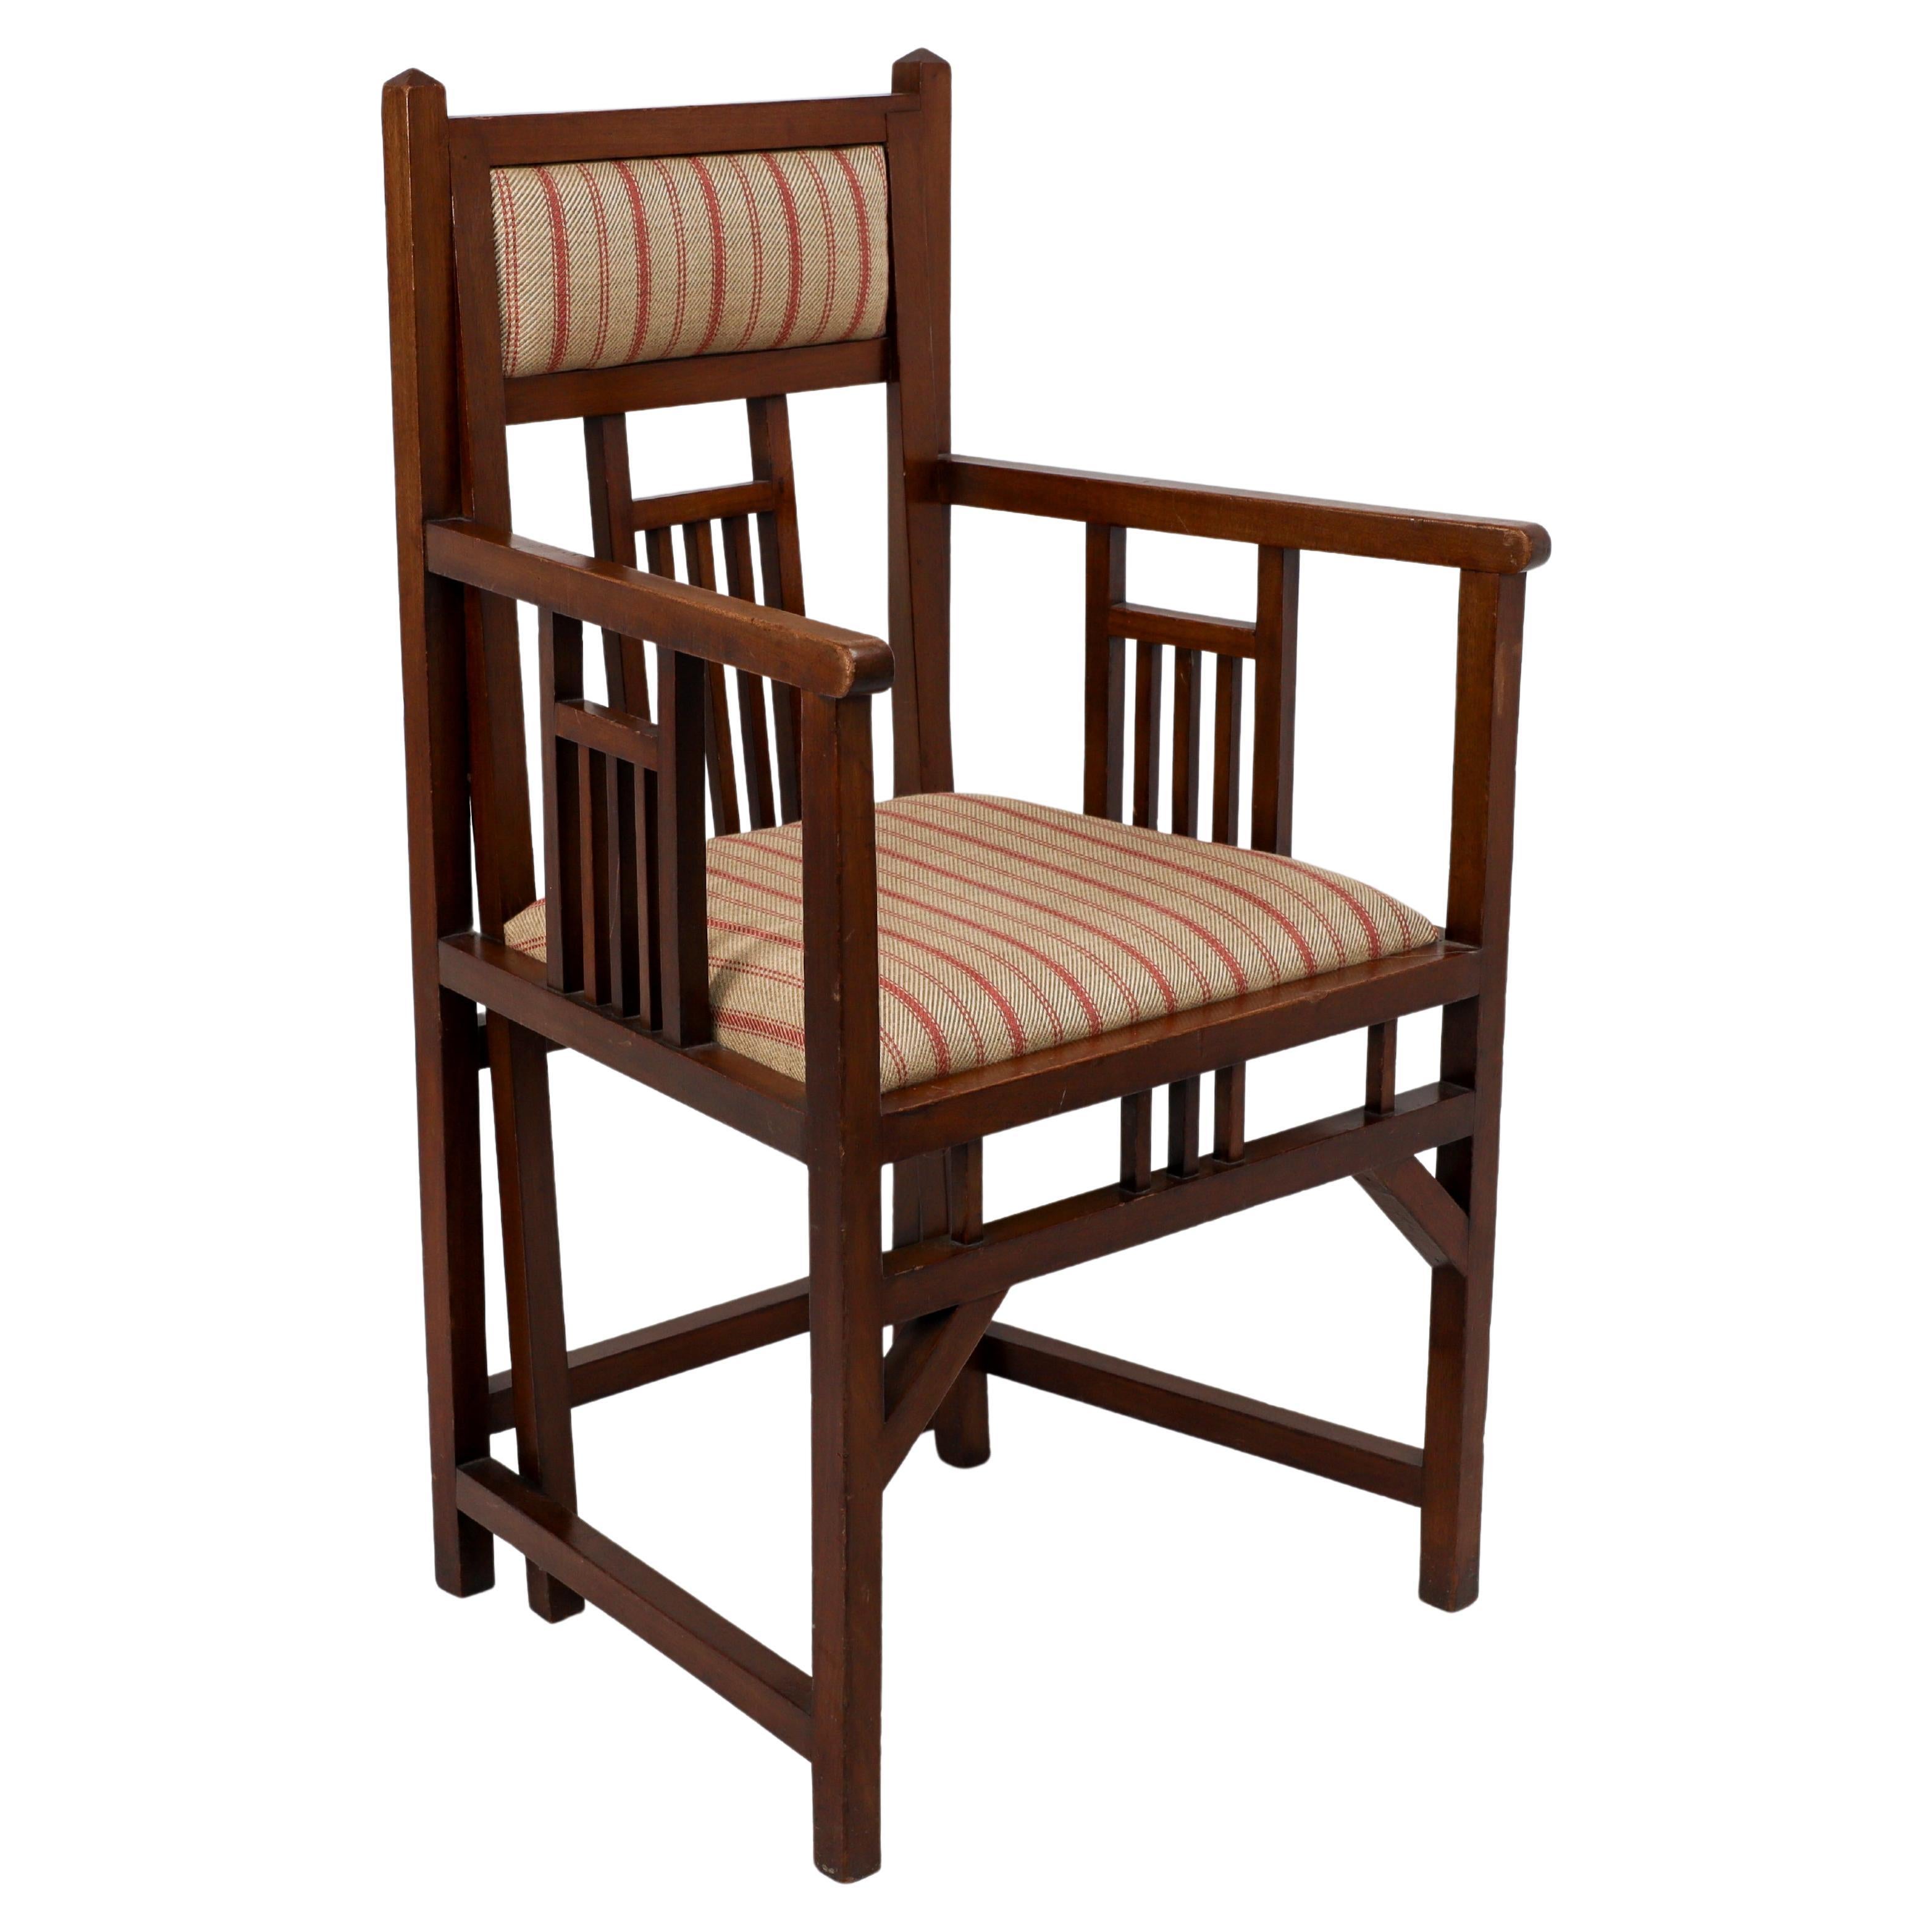 Bombay Art Furniture An Anglo-Japanese Walnut armchair with a double back leg. For Sale